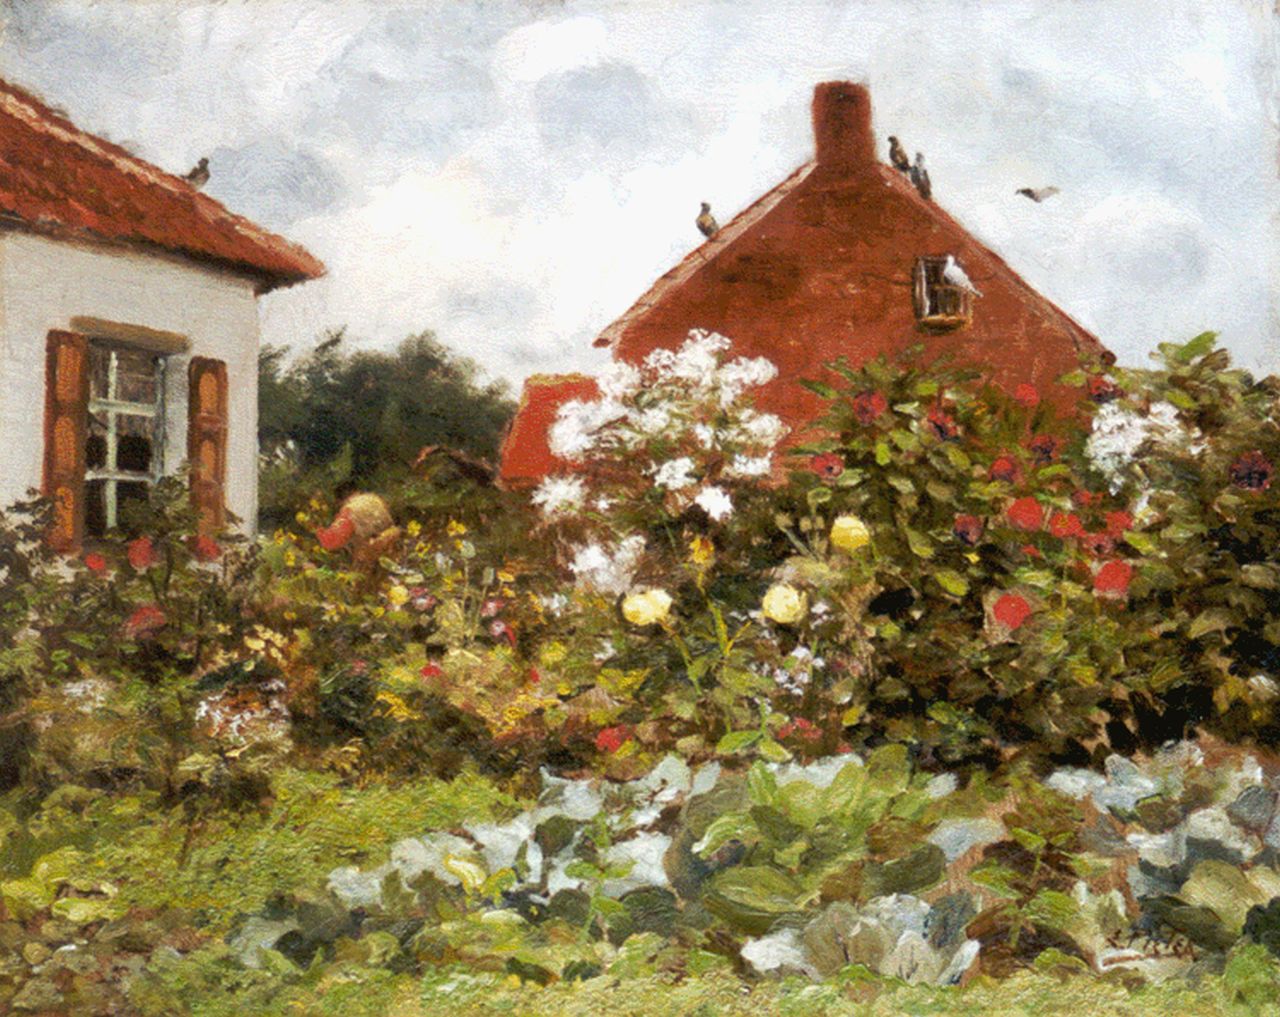 Pieters E.  | Evert Pieters, In the garden, oil on canvas 32.2 x 40.2 cm, signed l.r.